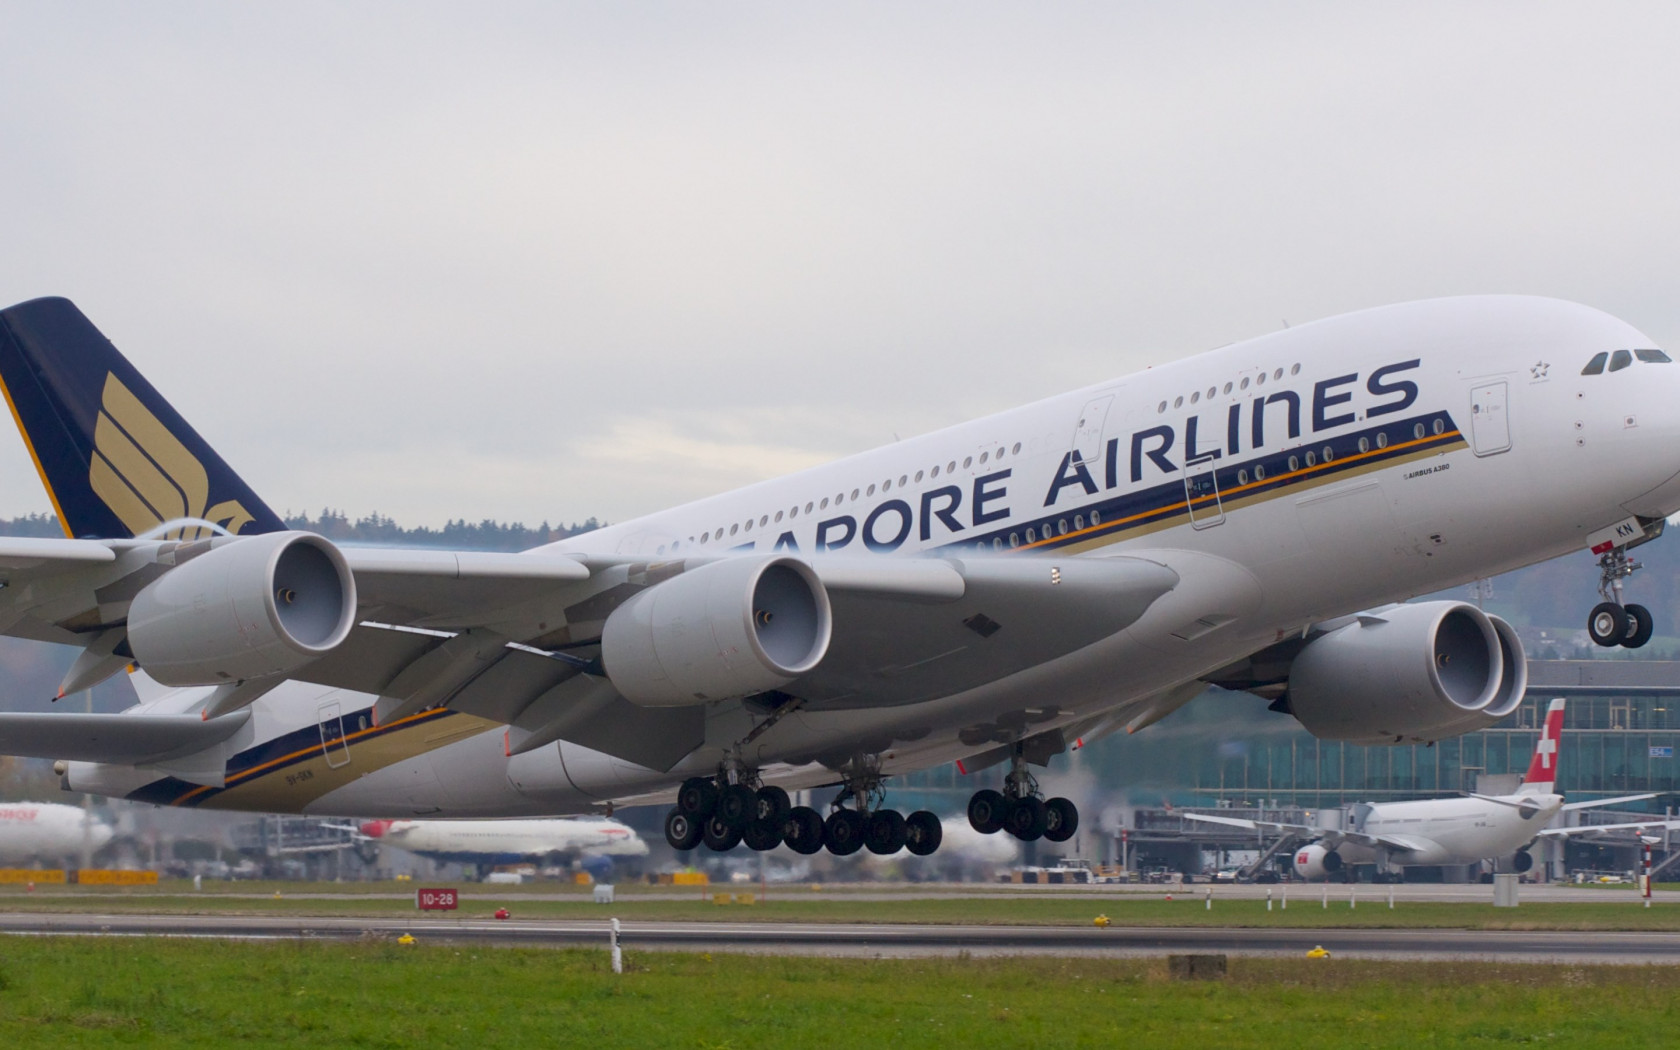 Passenger airplane from Singapore airlines wallpaper 1680x1050